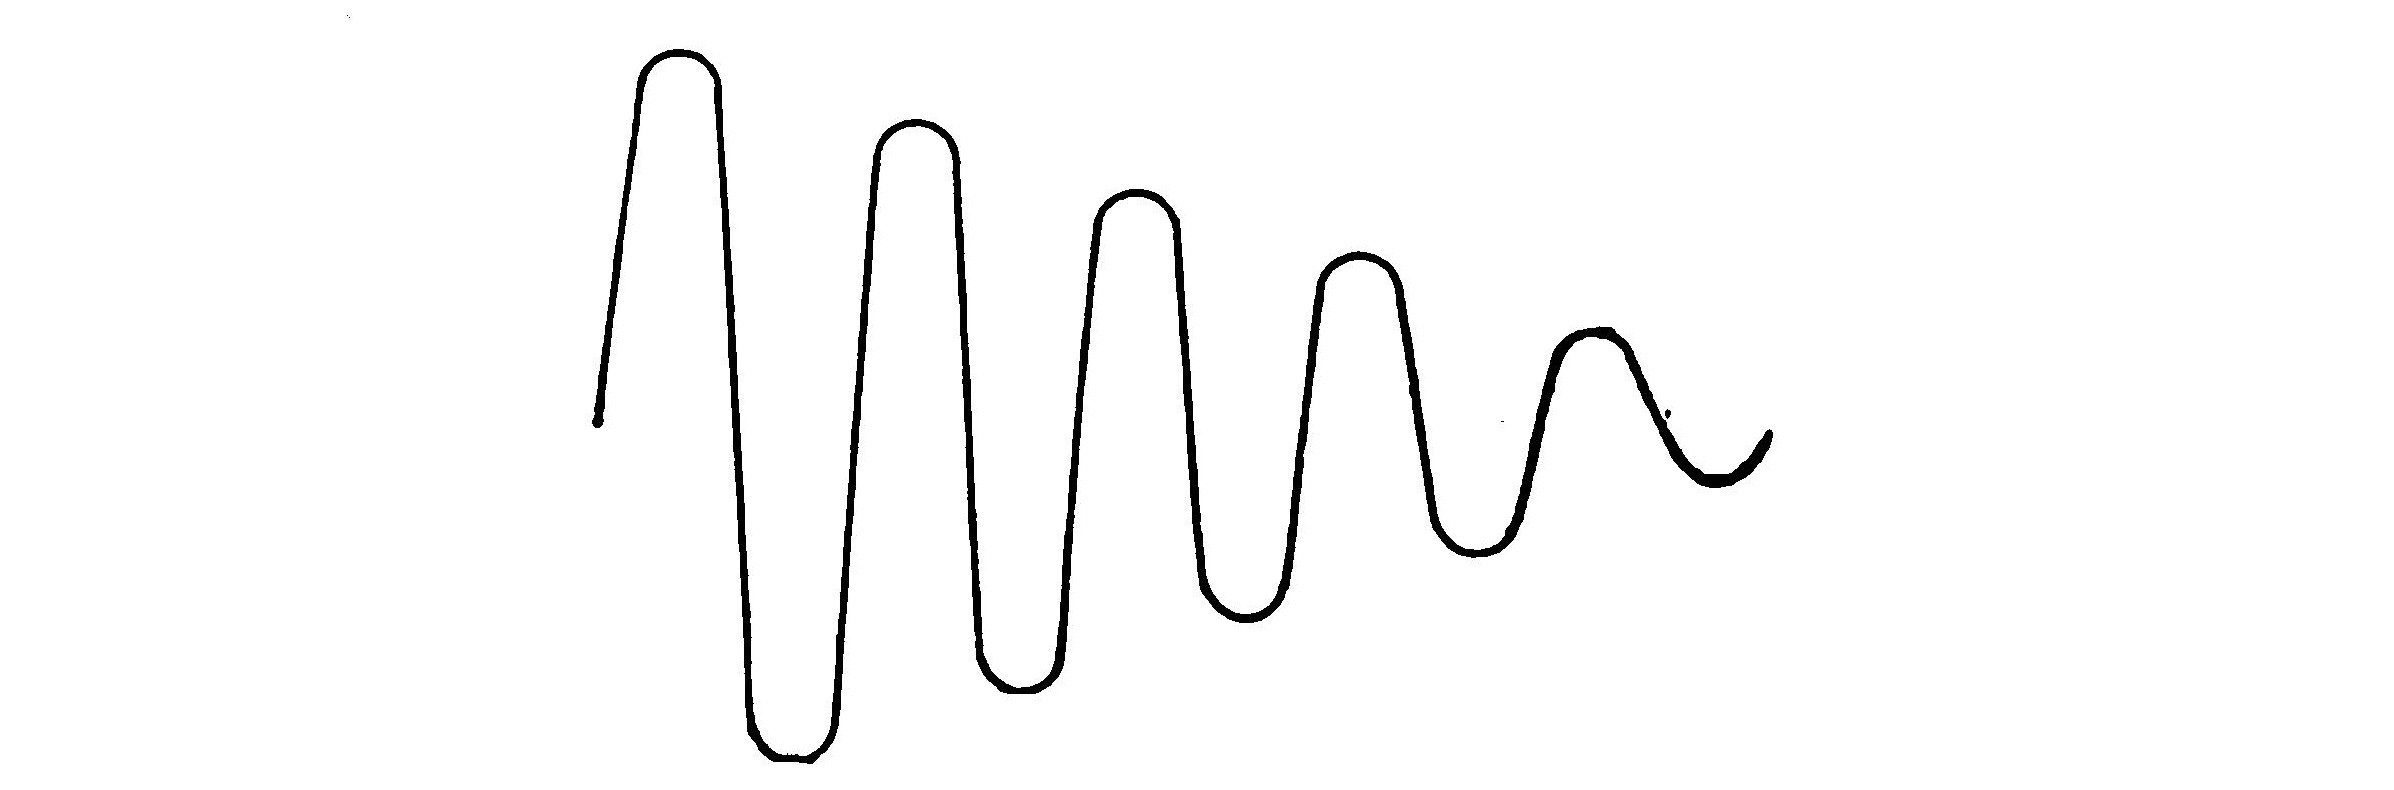 FIG. 5.—Curved line representing an oscillatory discharge of a Leyden jar.